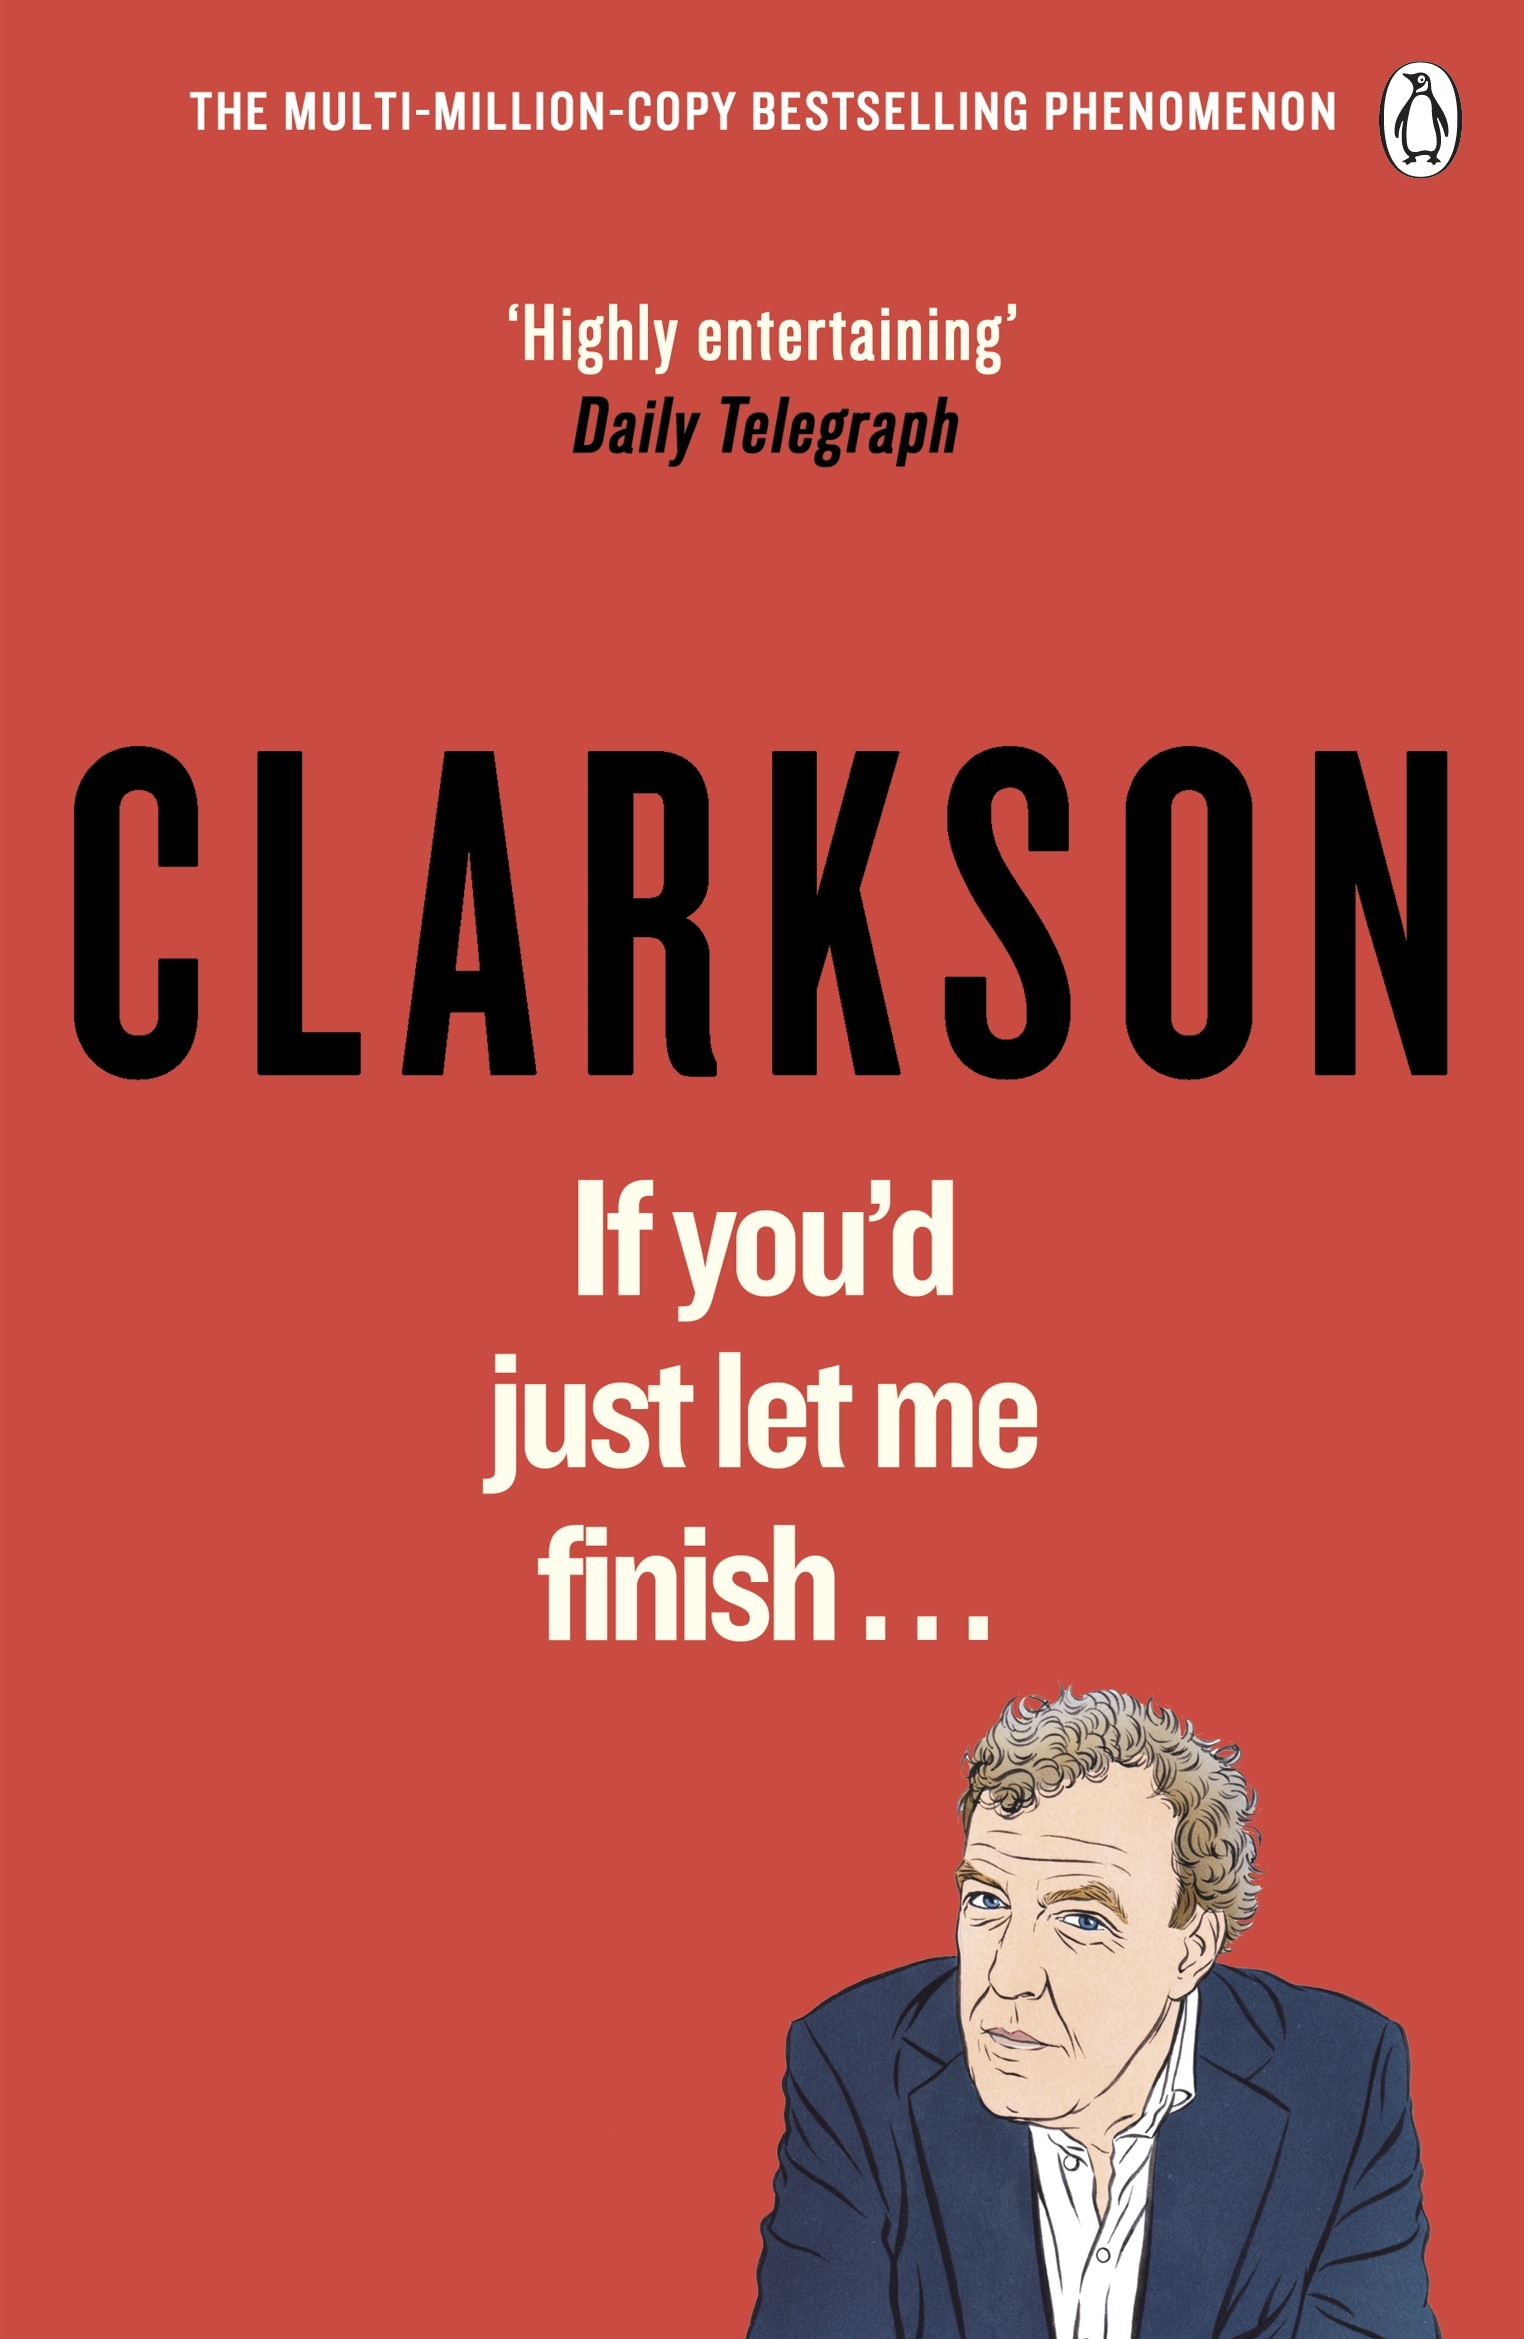 Book “If You’d Just Let Me Finish” by Jeremy Clarkson